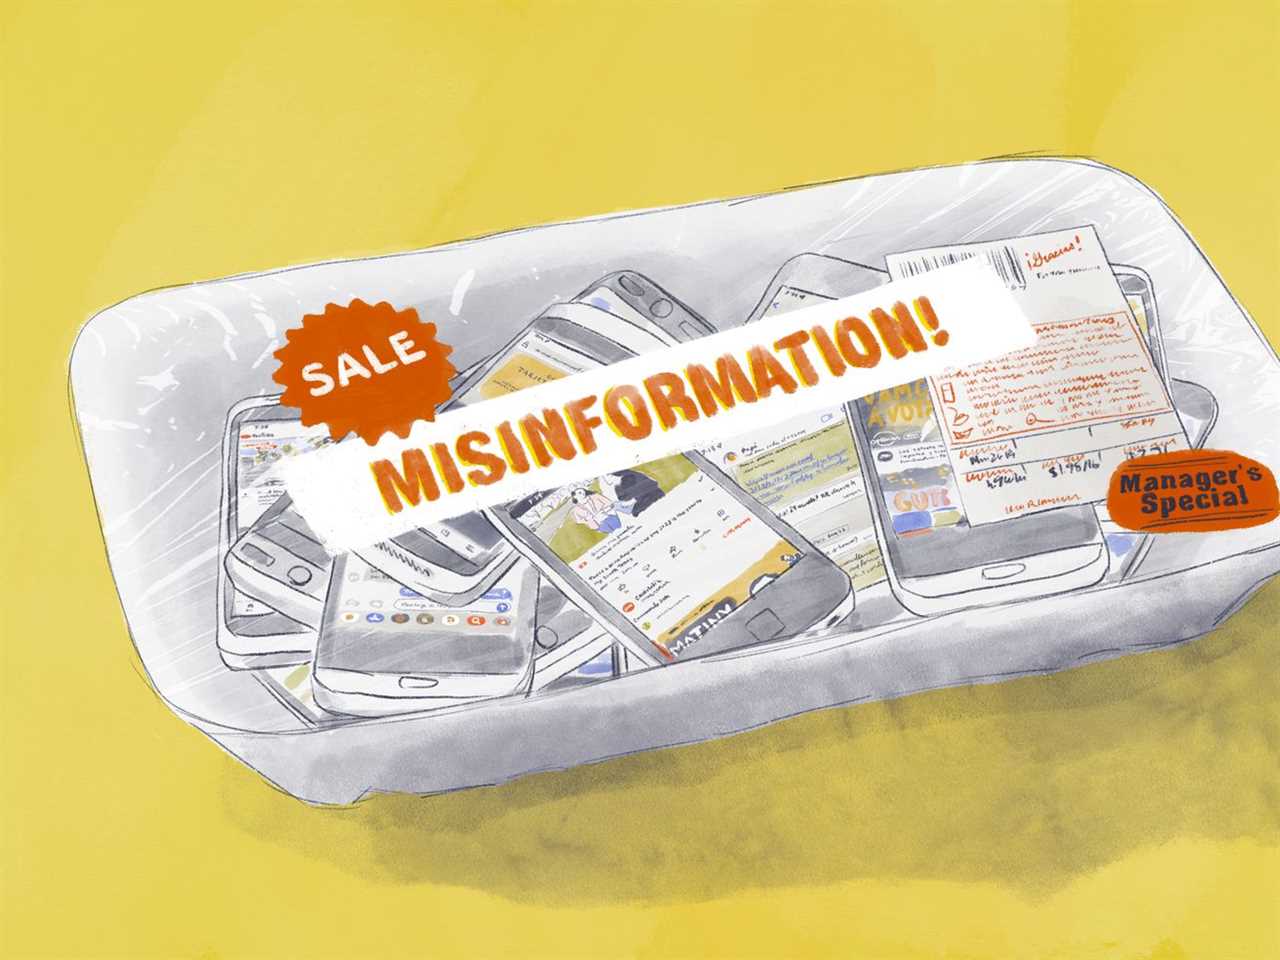 Illustration of a grocery store package that says “Sale: Misinformation!”